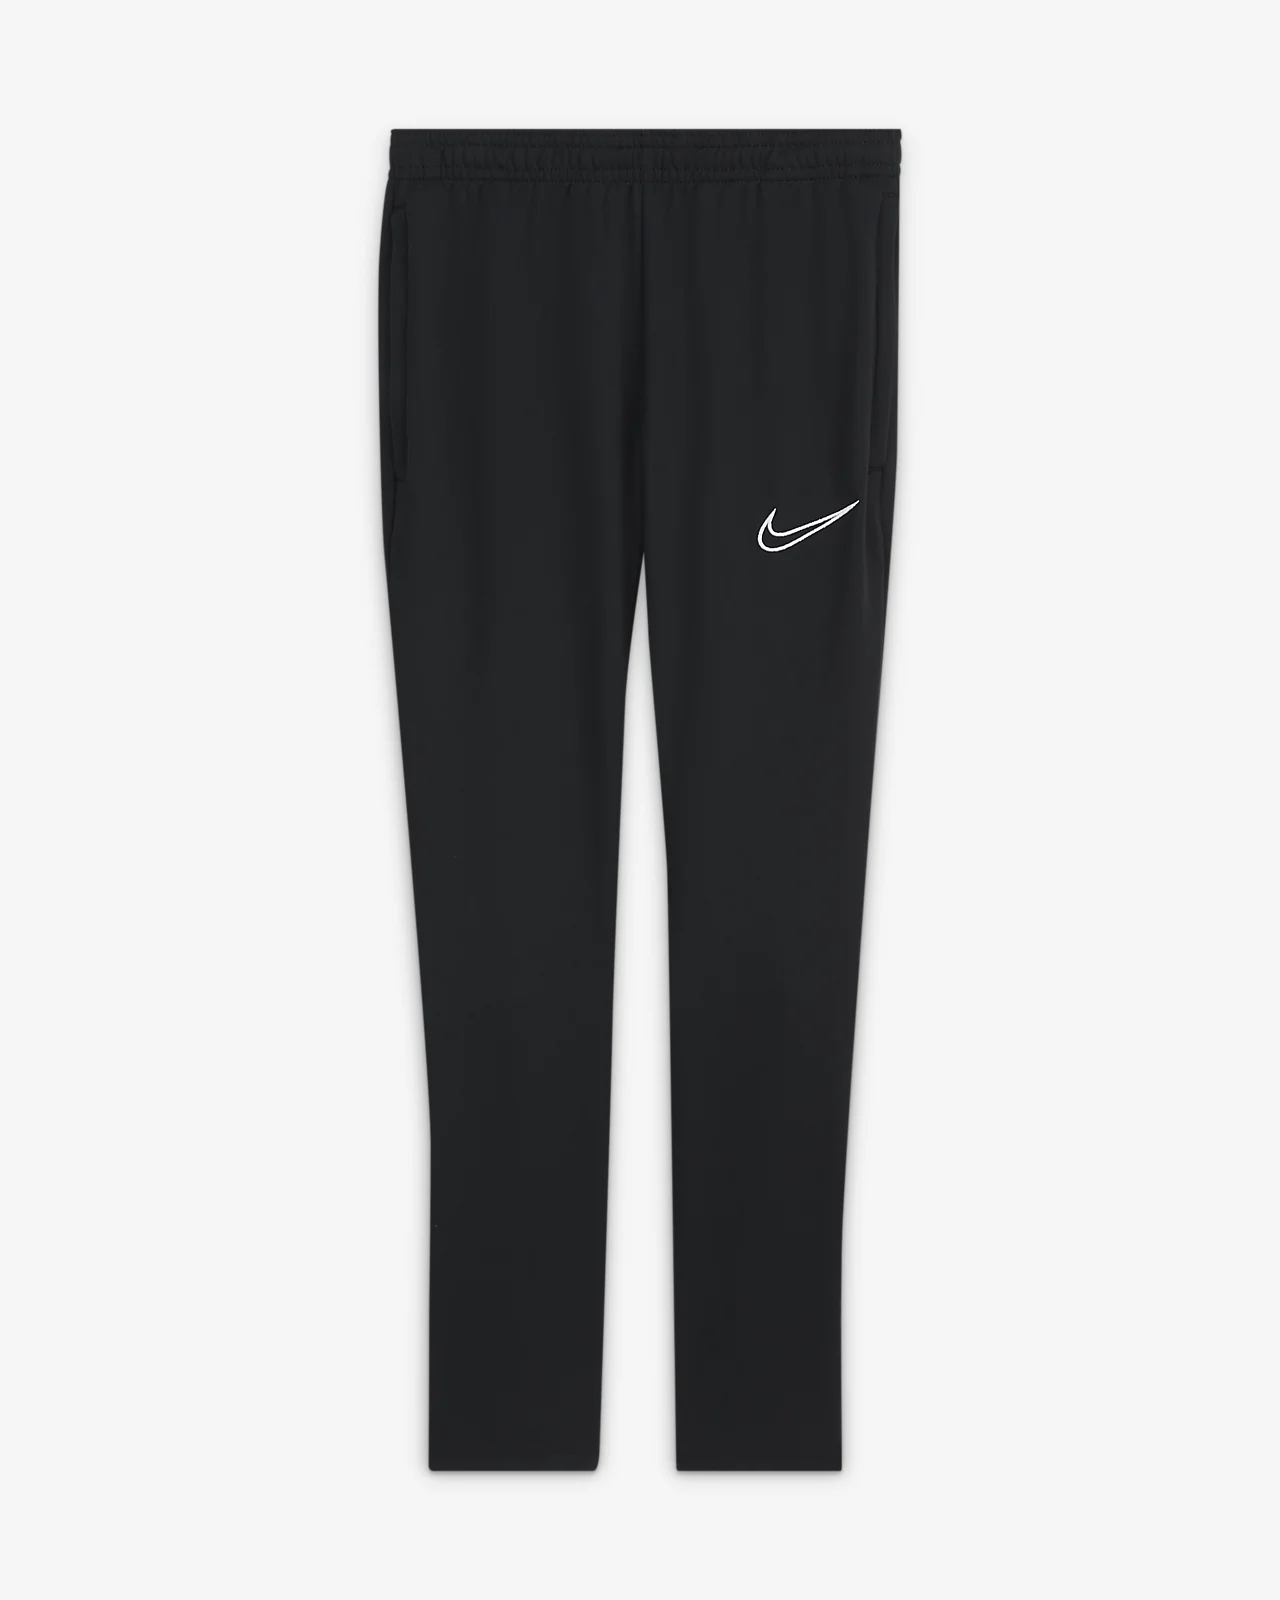 Nike Dry-fit Academy Pant Youth CW6124-010